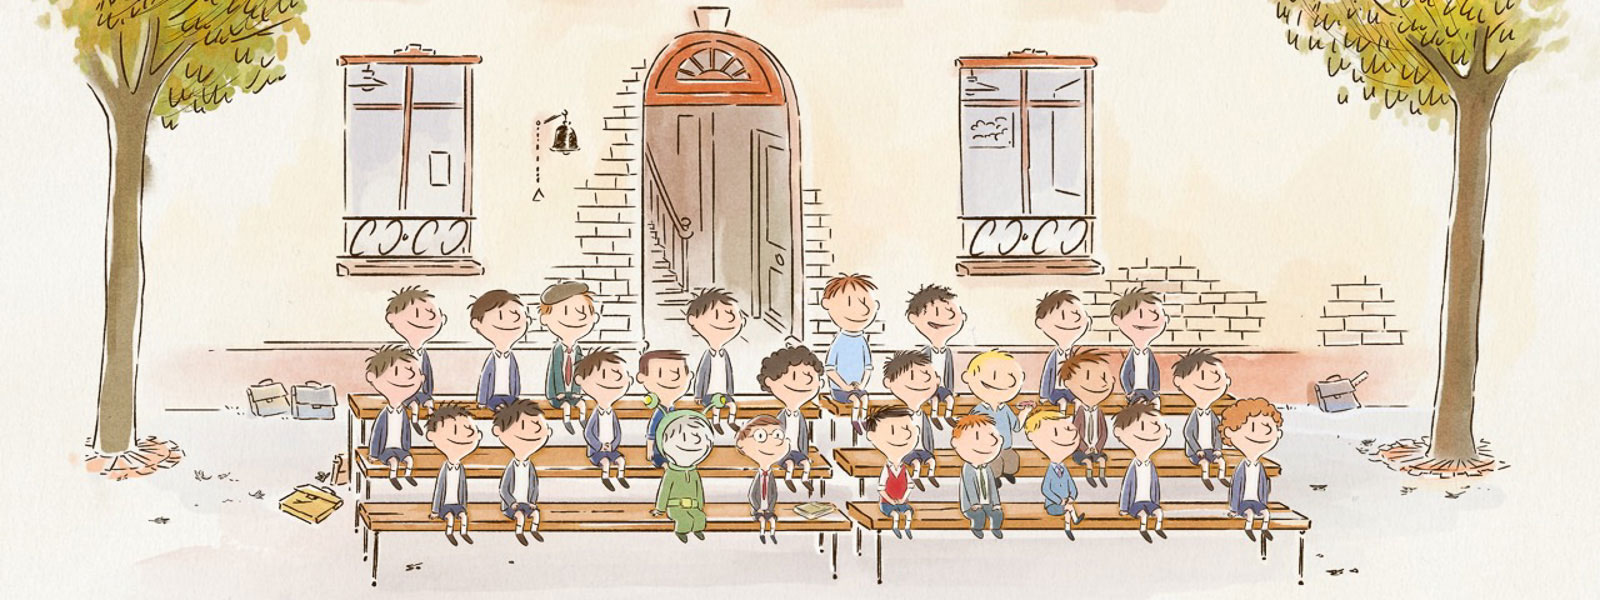 Image from 'Little Nicholas: Happy as Can Be'